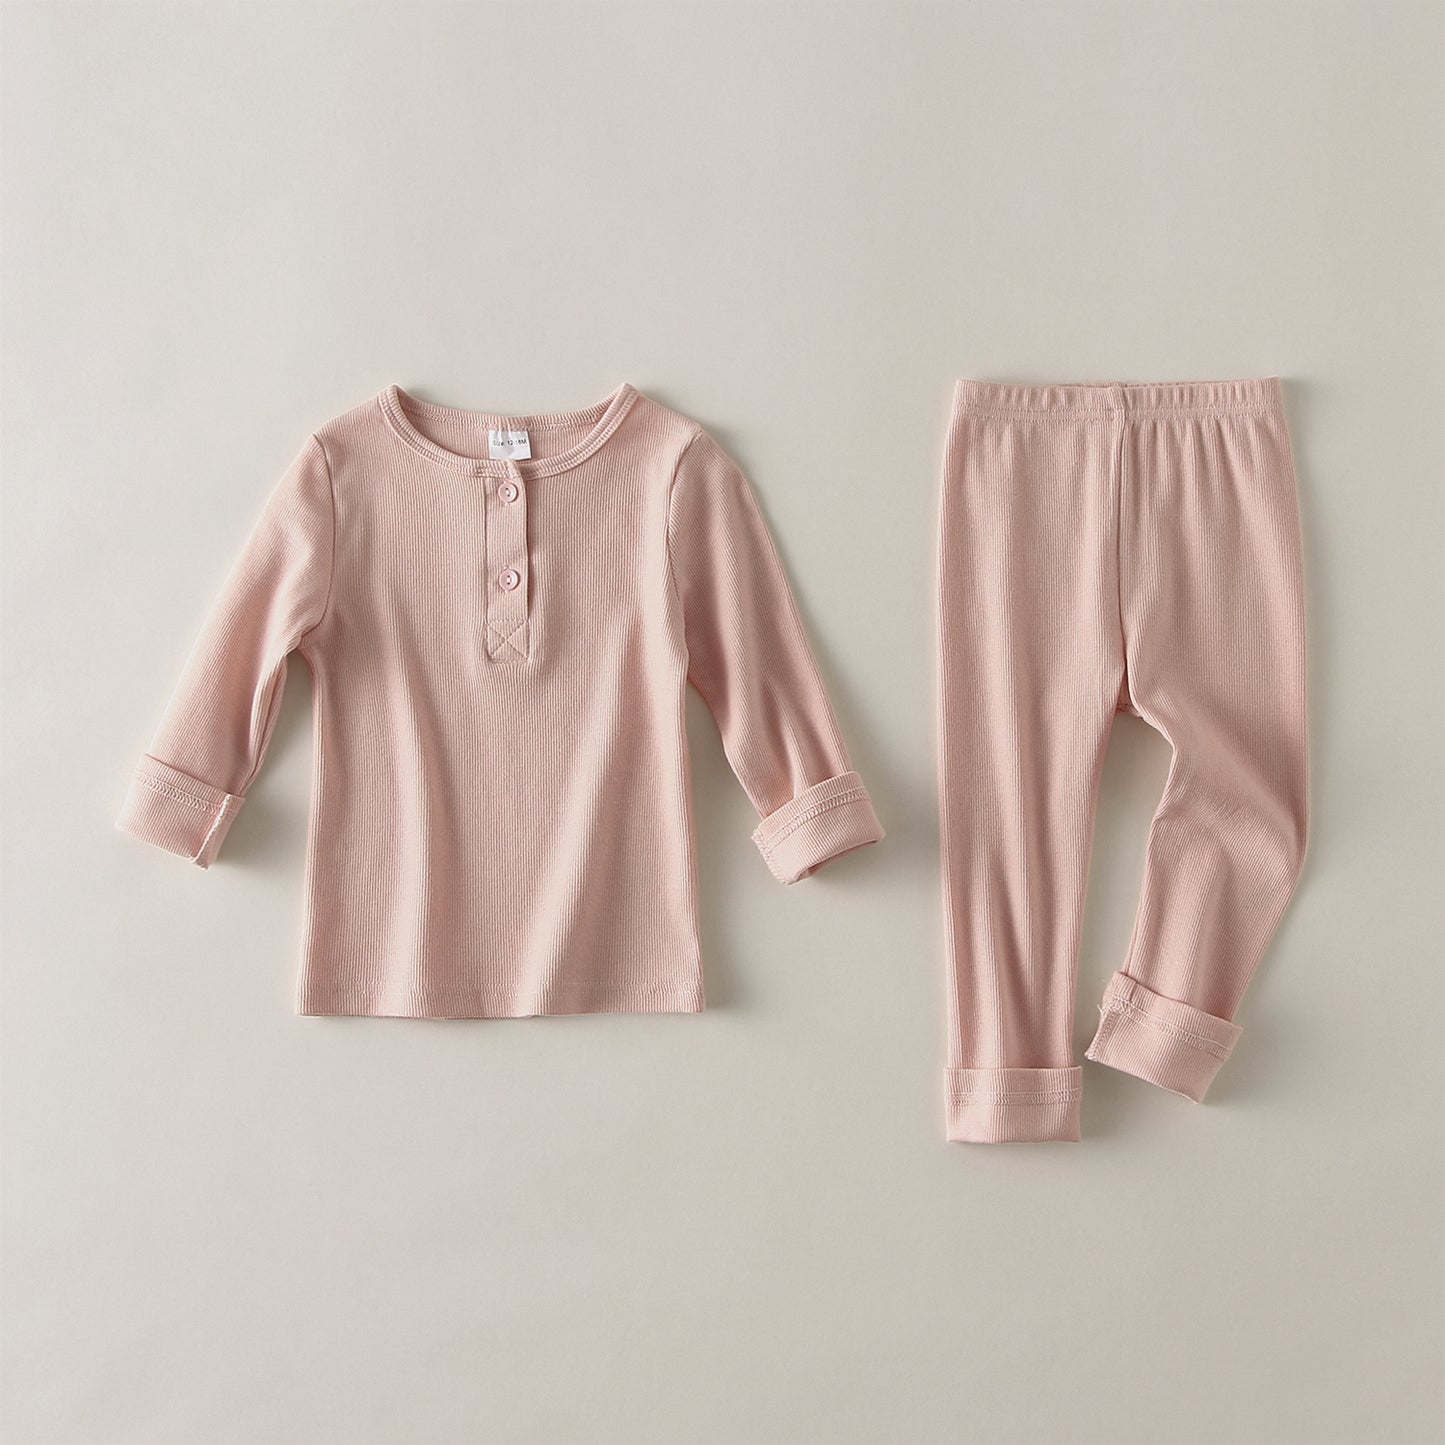 Two Button Two Piece Pajamas Sets